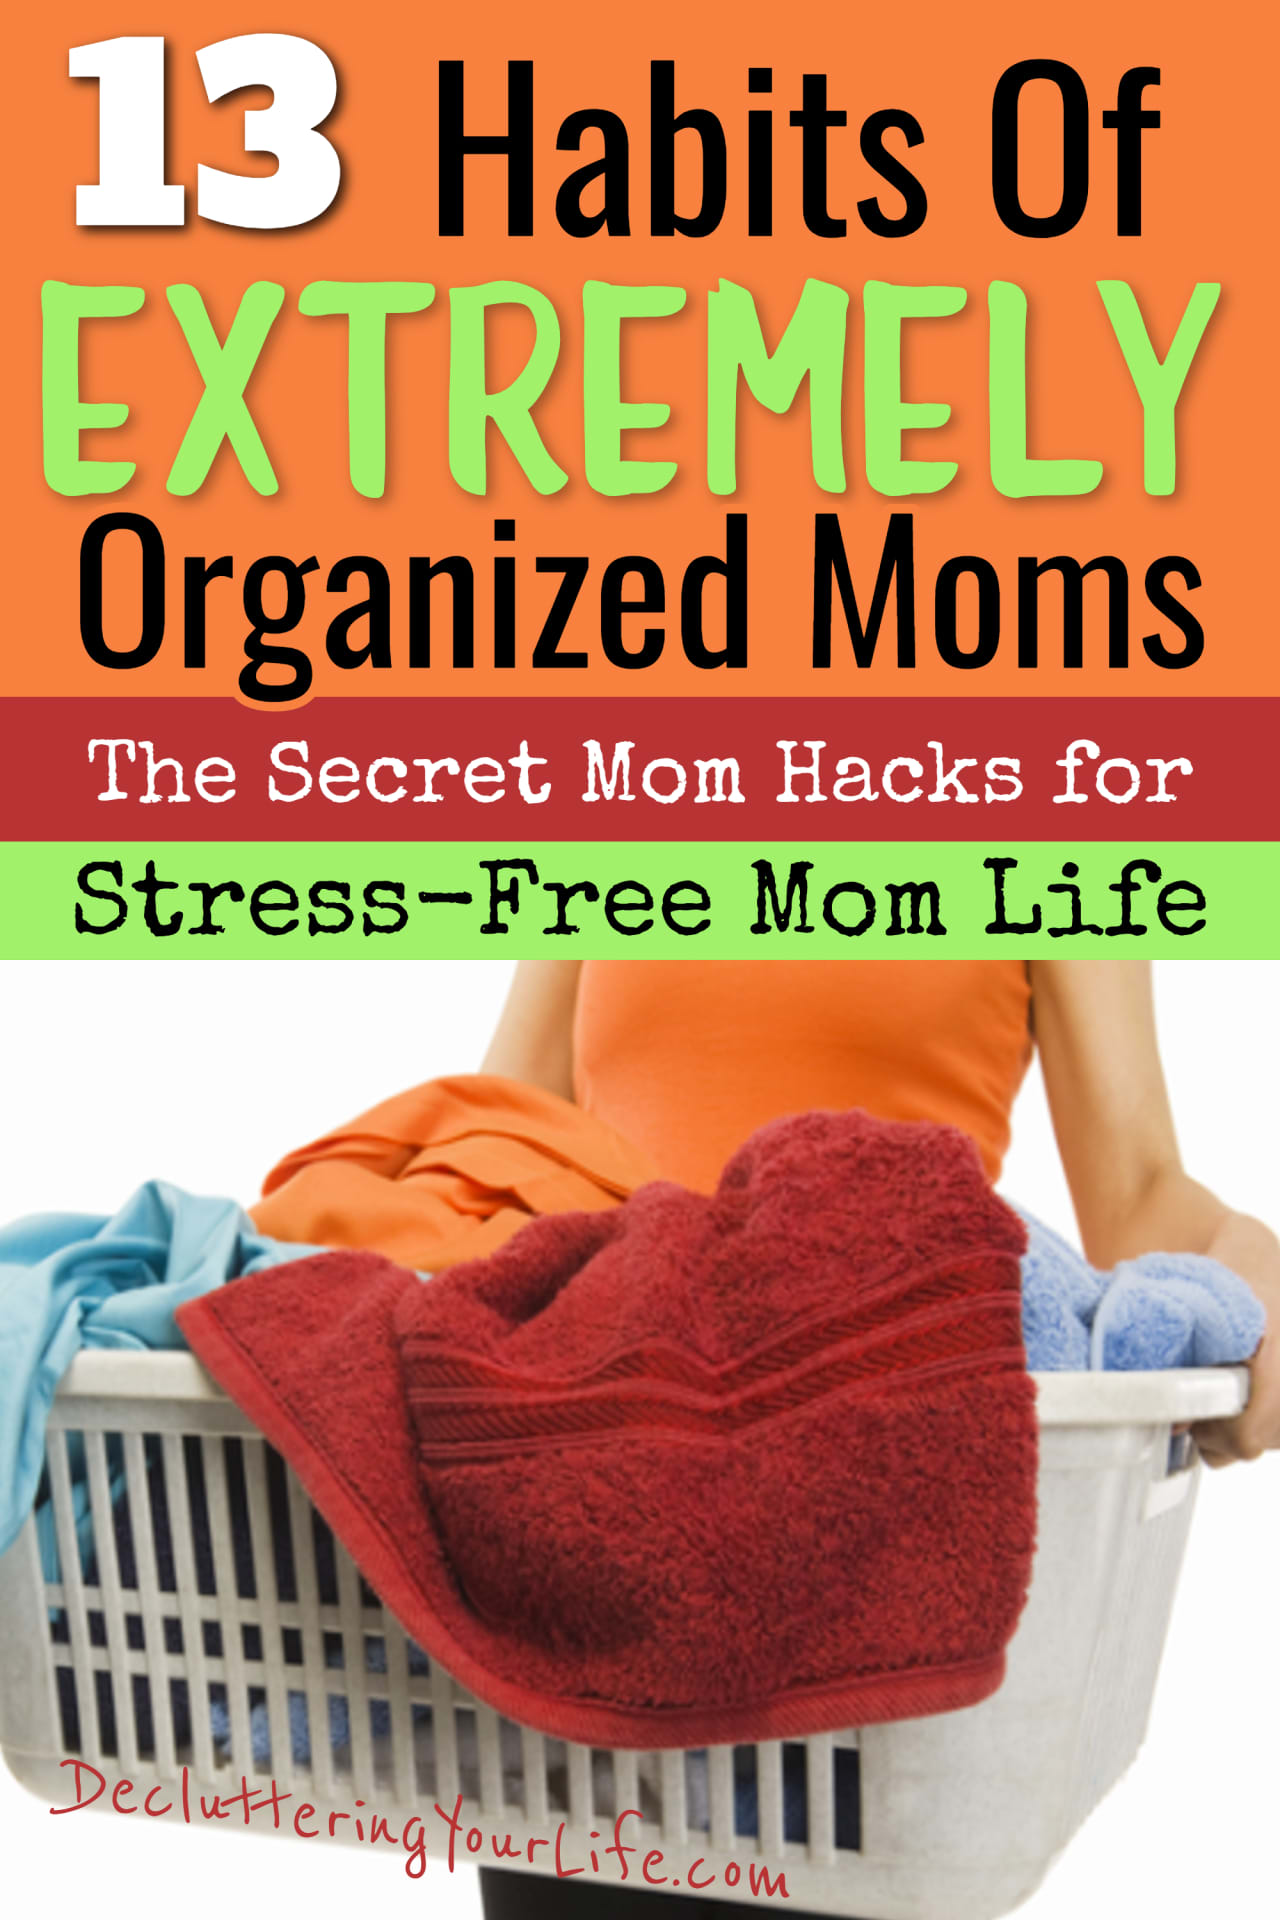 Organized Mom HACKS - Getting Organized at Home is hard when you're feeling overwhelmed by clutter and mom life. Printable checklist of useful life hacks, cleaning hacks tips and tricks, clutter organization ideas, speed cleaning tips, storage solutions (and motivation) and easy DIY organization ideas will get you organizing your home like Organized Moms! Tidy up, organize declutter your life and STAY organized even if you're on a budget or a lazy girl. Simple household hacks to simplify your life.